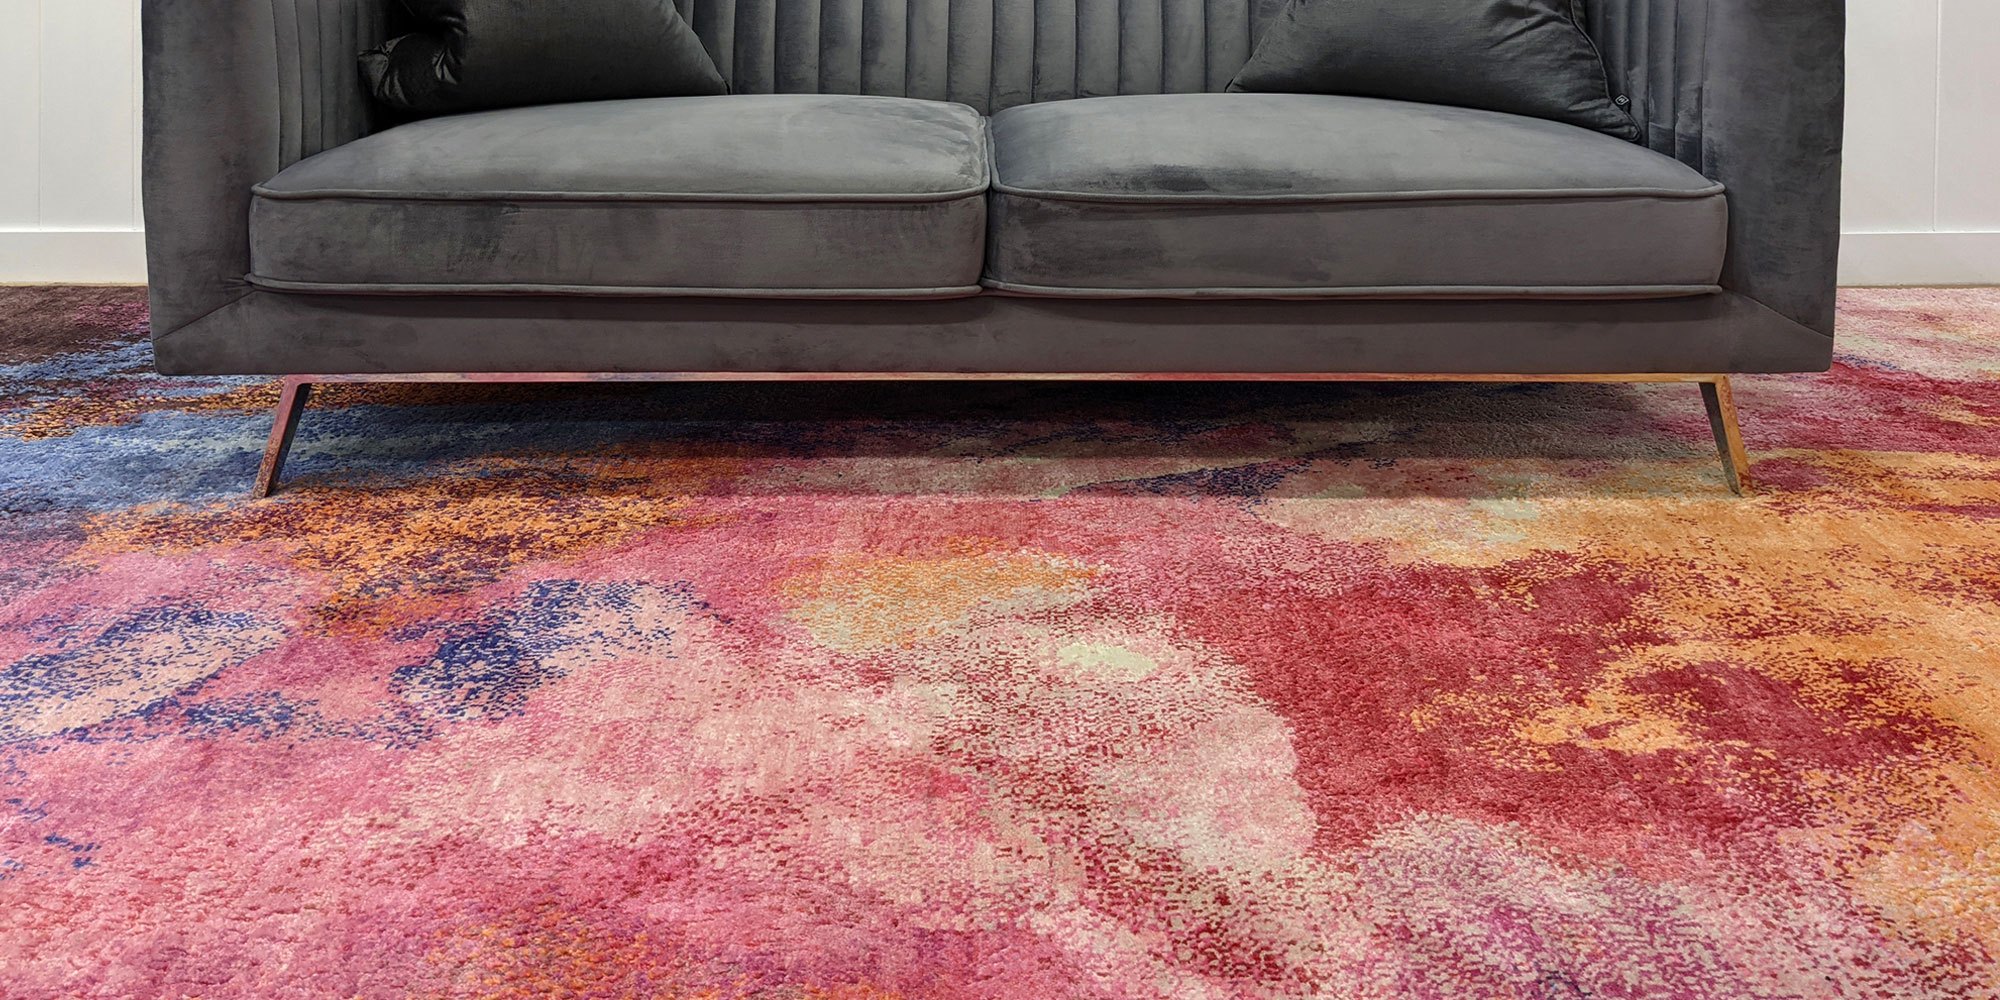 Cool Blues to Warm Reds - Sara’s Five Favourite Rugs